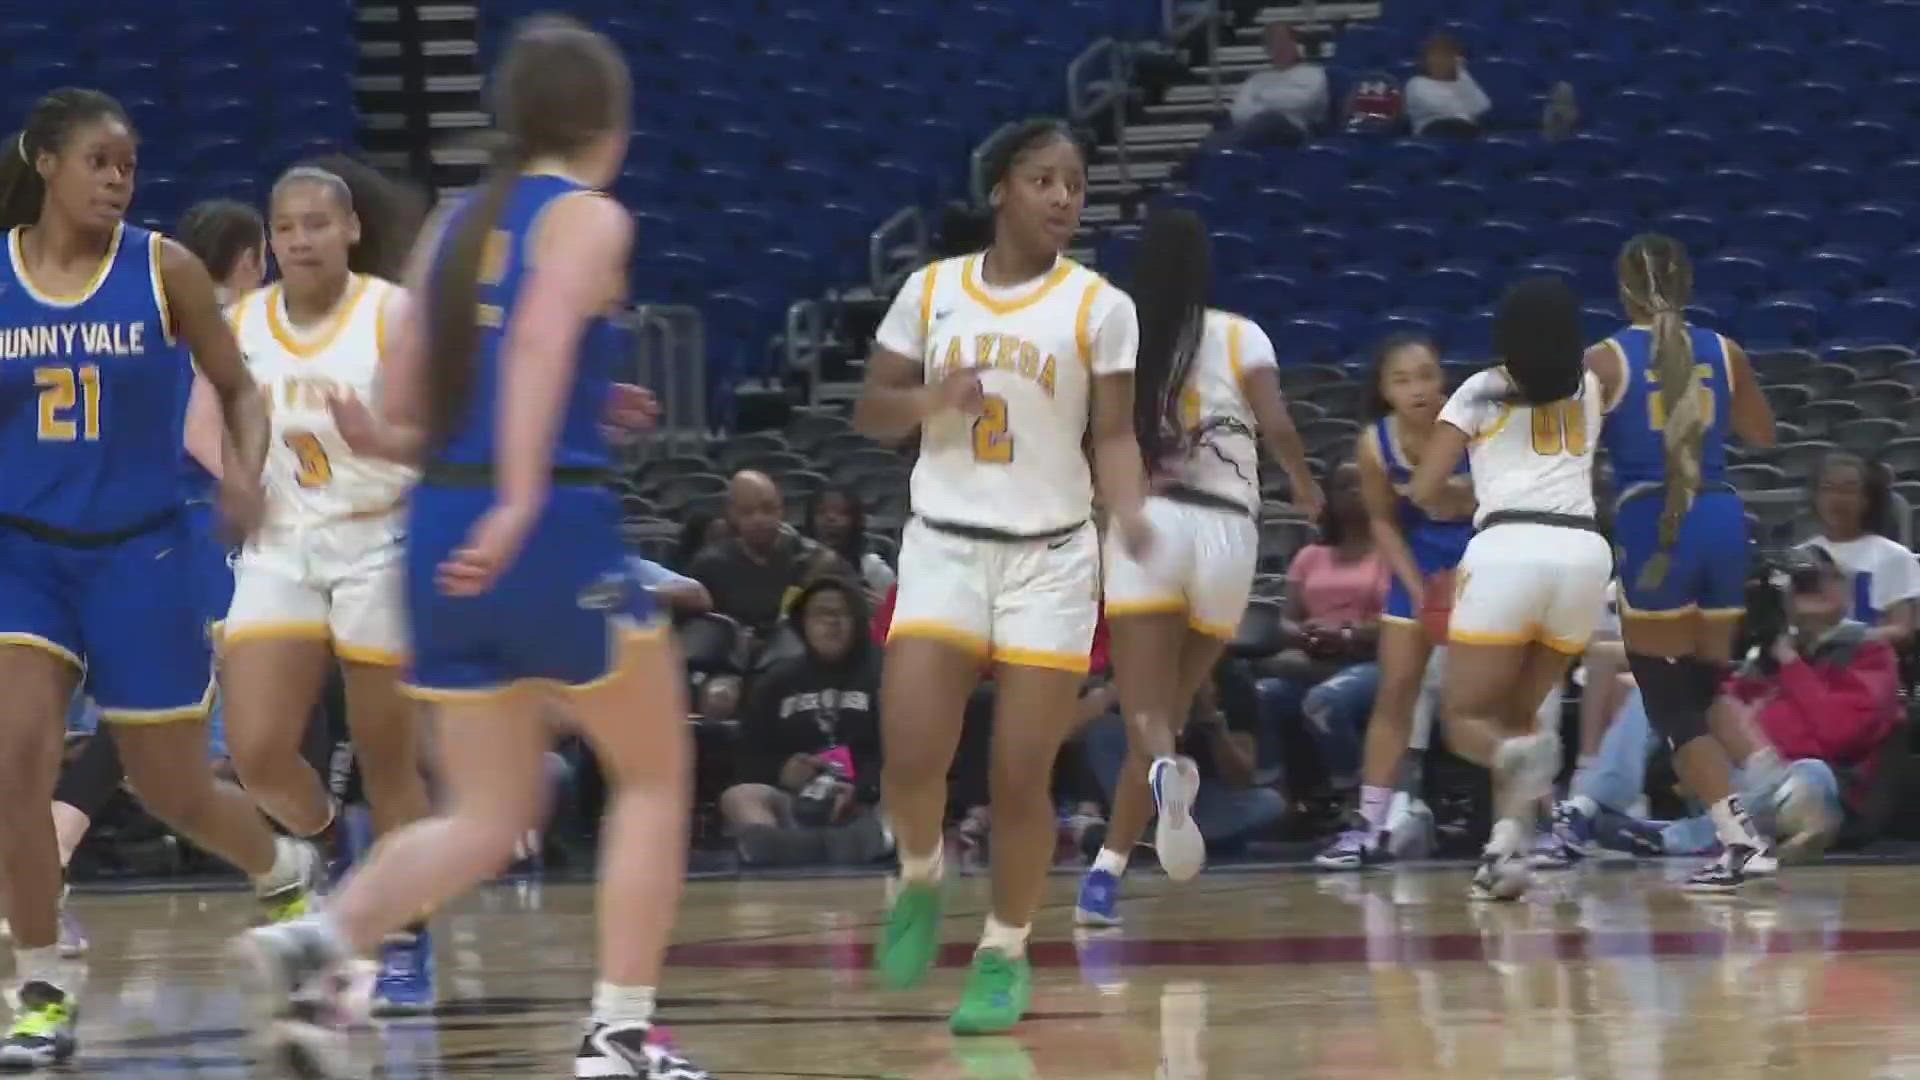 The Lady Pirates captured their first girl's basketball state title since 2014